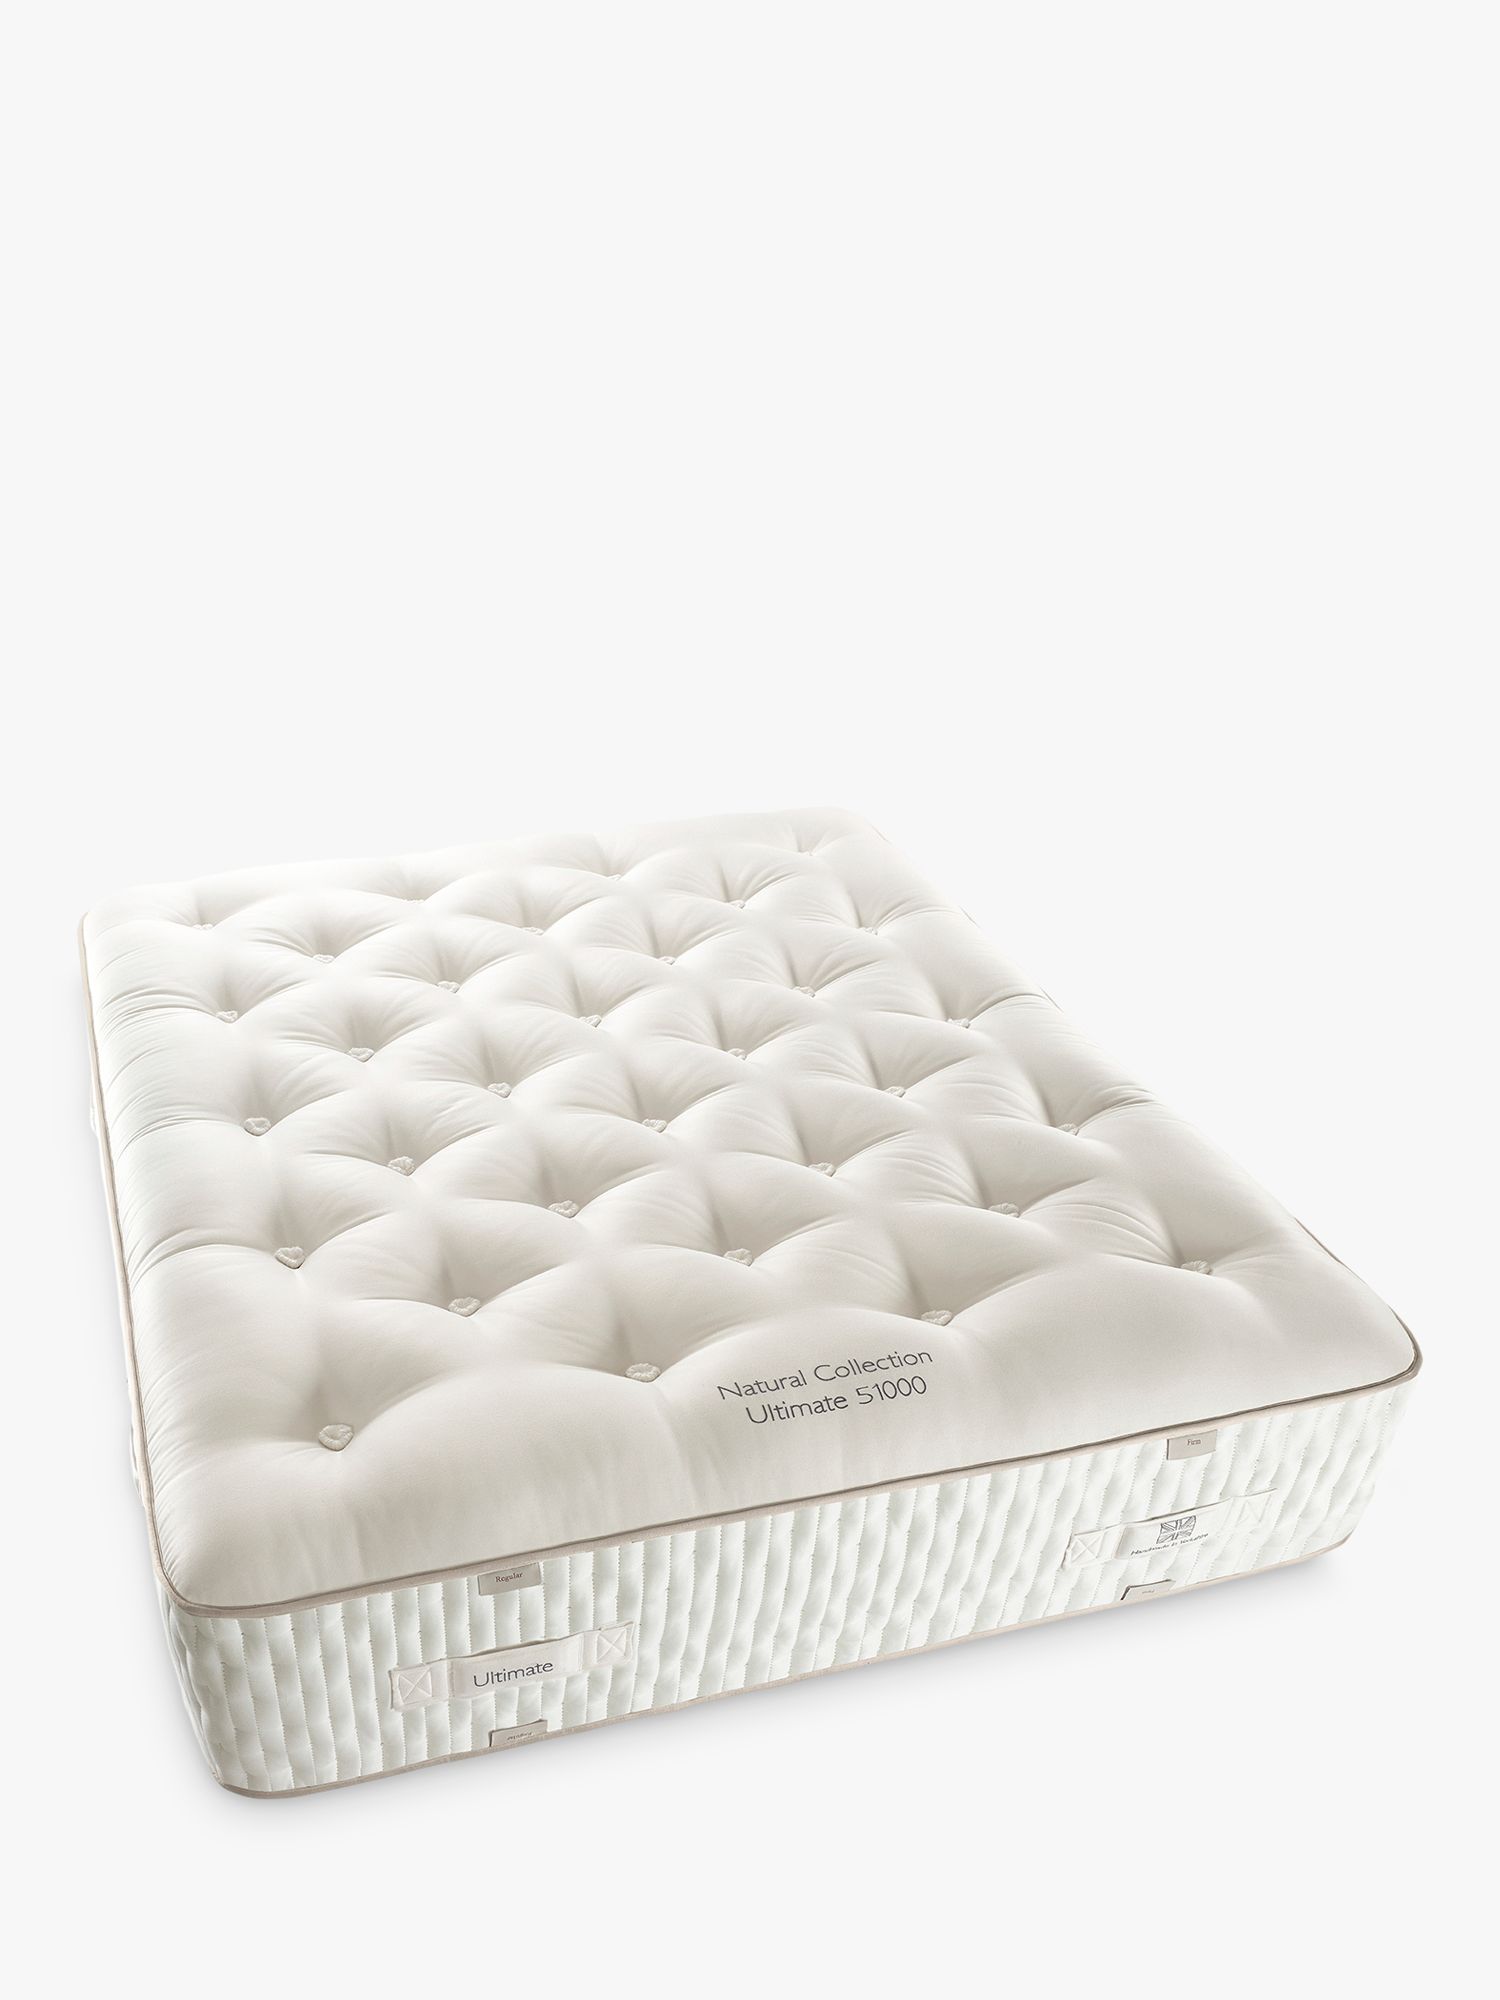 Photo of John lewis ultimate natural collection 51000 emperor firmer tension pocket spring mattress